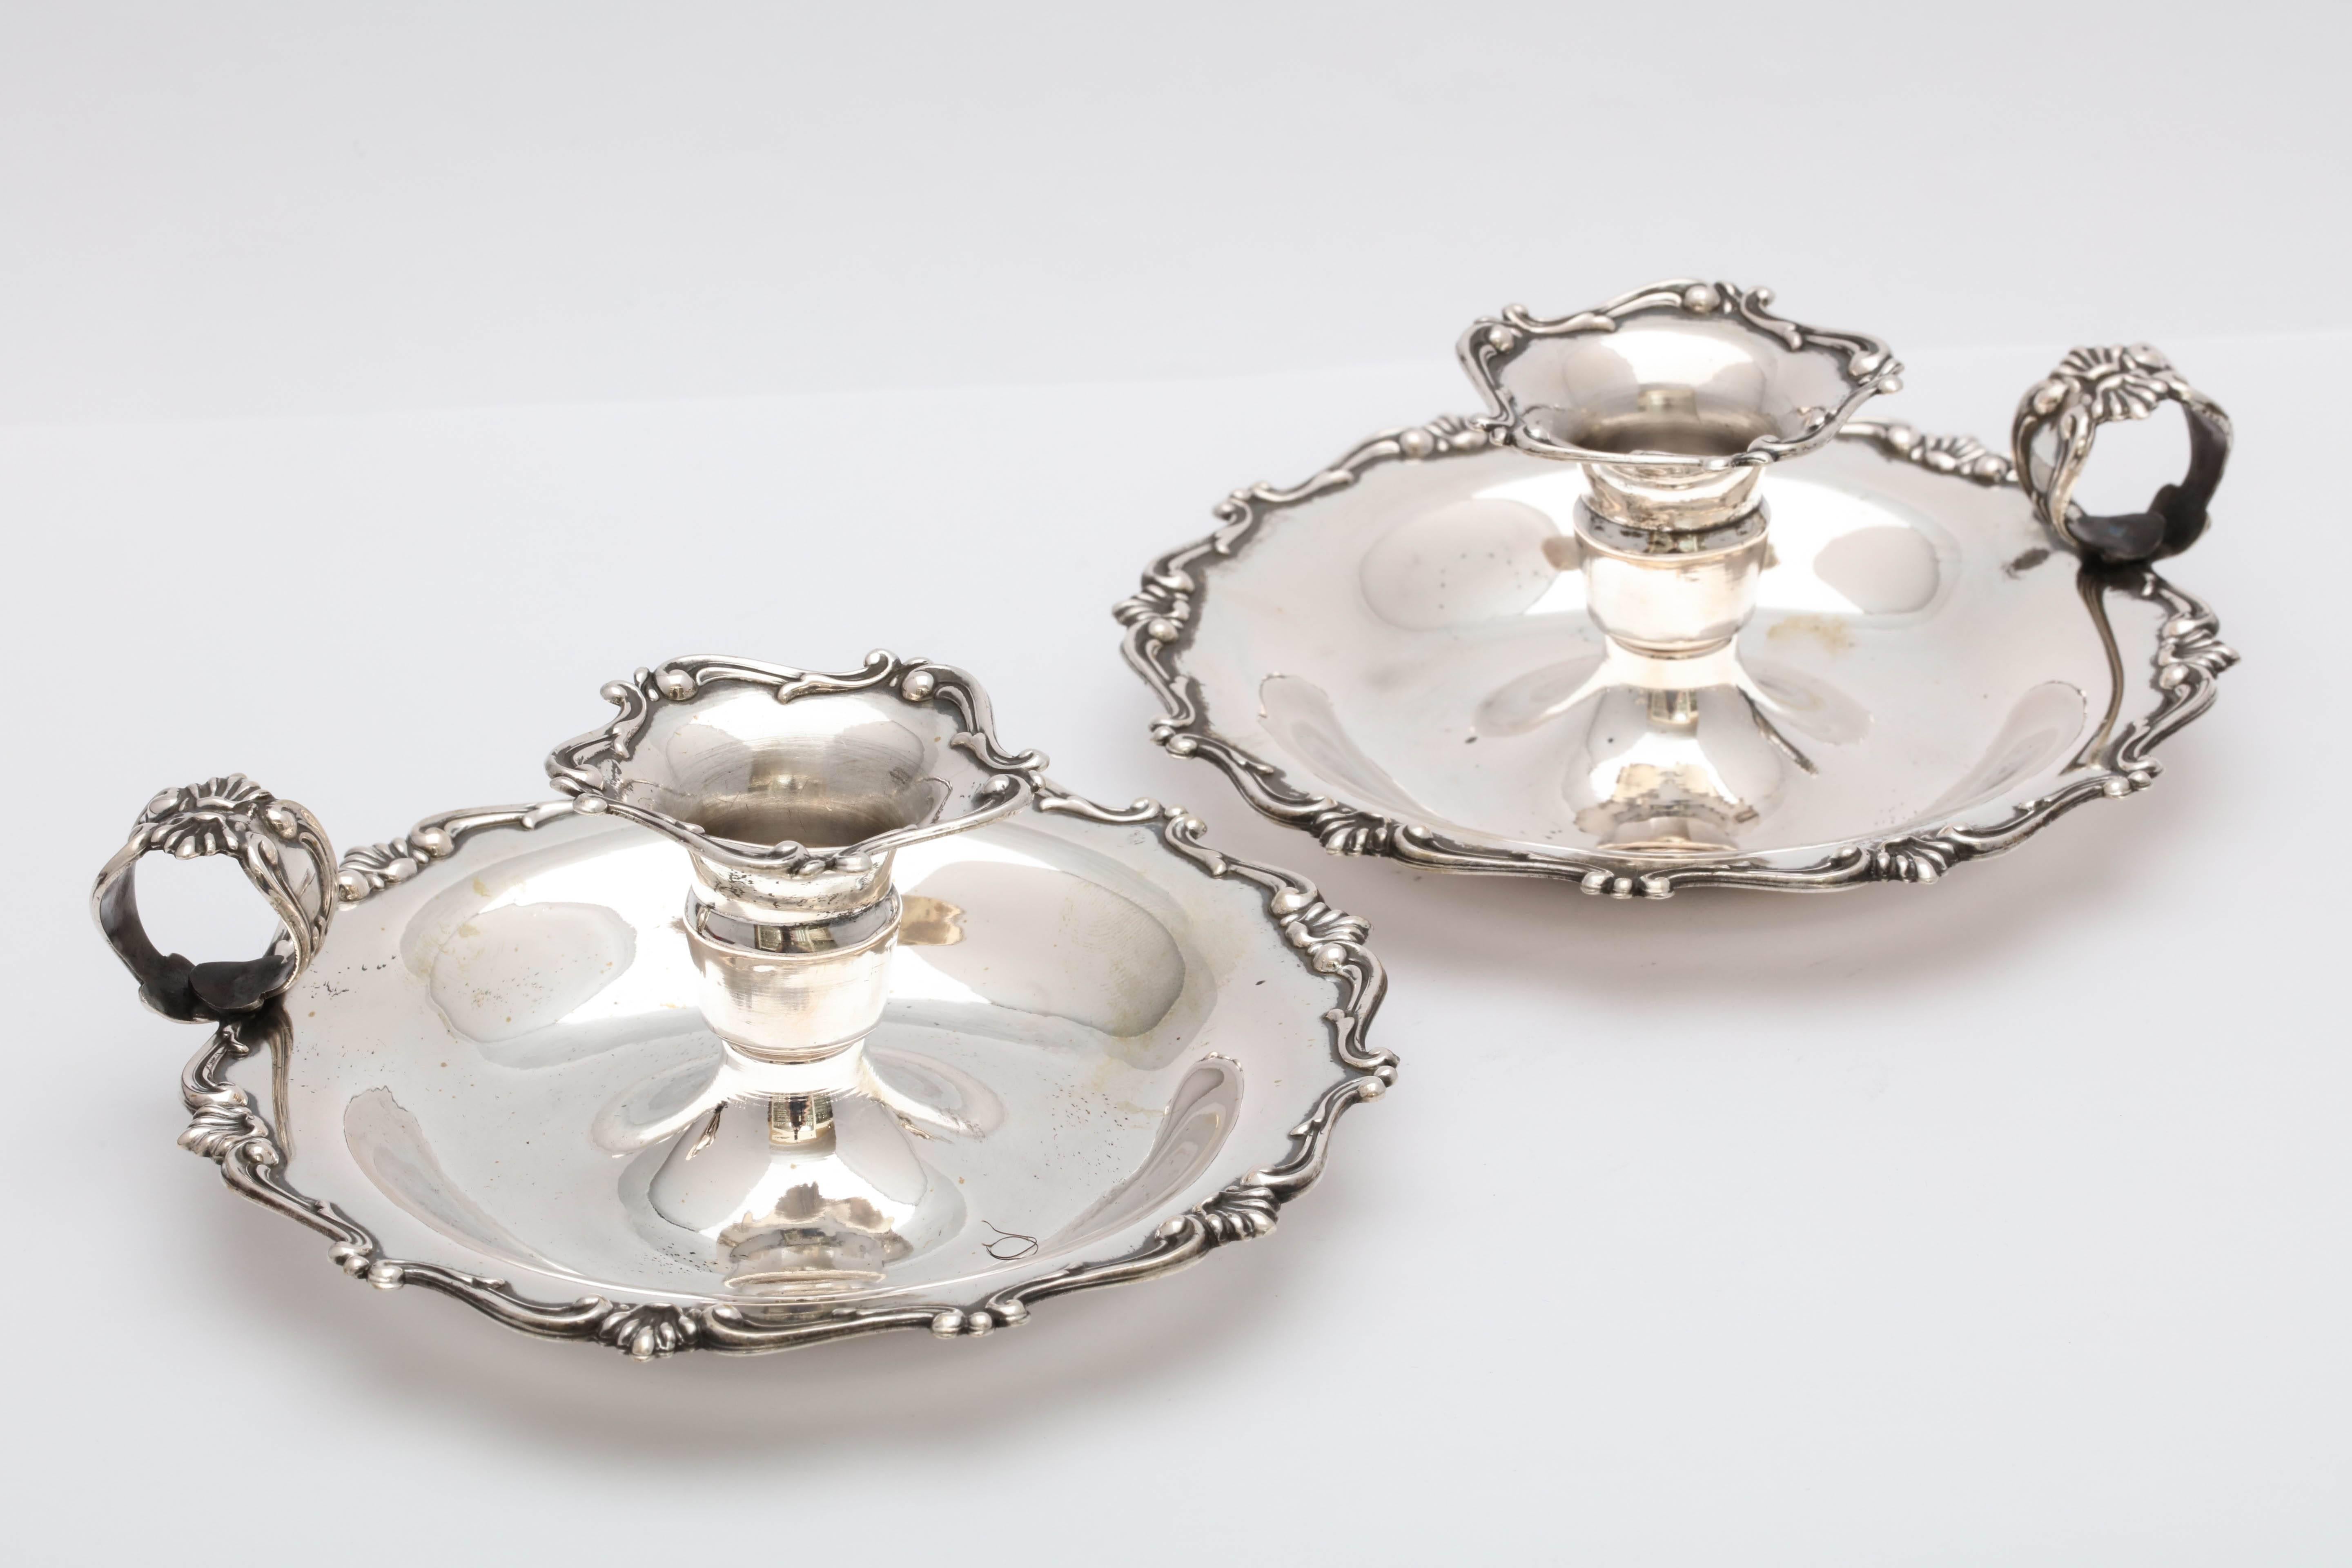 Pair of continental silver ‘.800’, Edwardian style chamber sticks, Italy, circa 1930s. Each measures five inches in diameter x 2 1/2 inches high. The pair weighs 5.875 troy ounces. Dark spots in photos are reflections. Excellent condition.